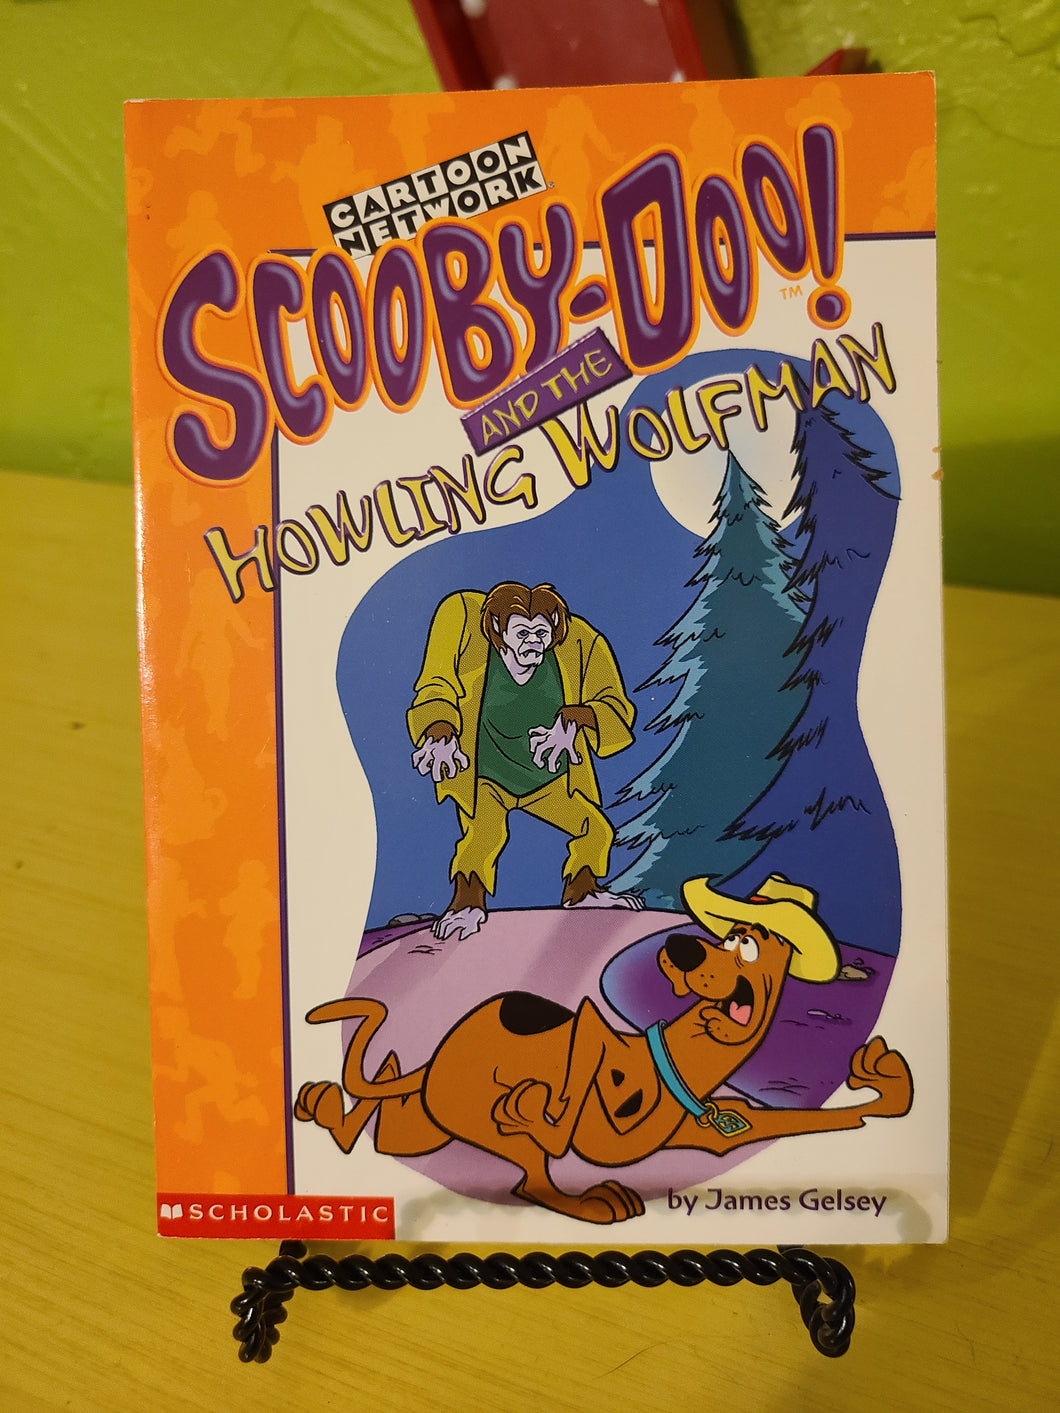 Scooby-Doo: and the Howling Wolfman